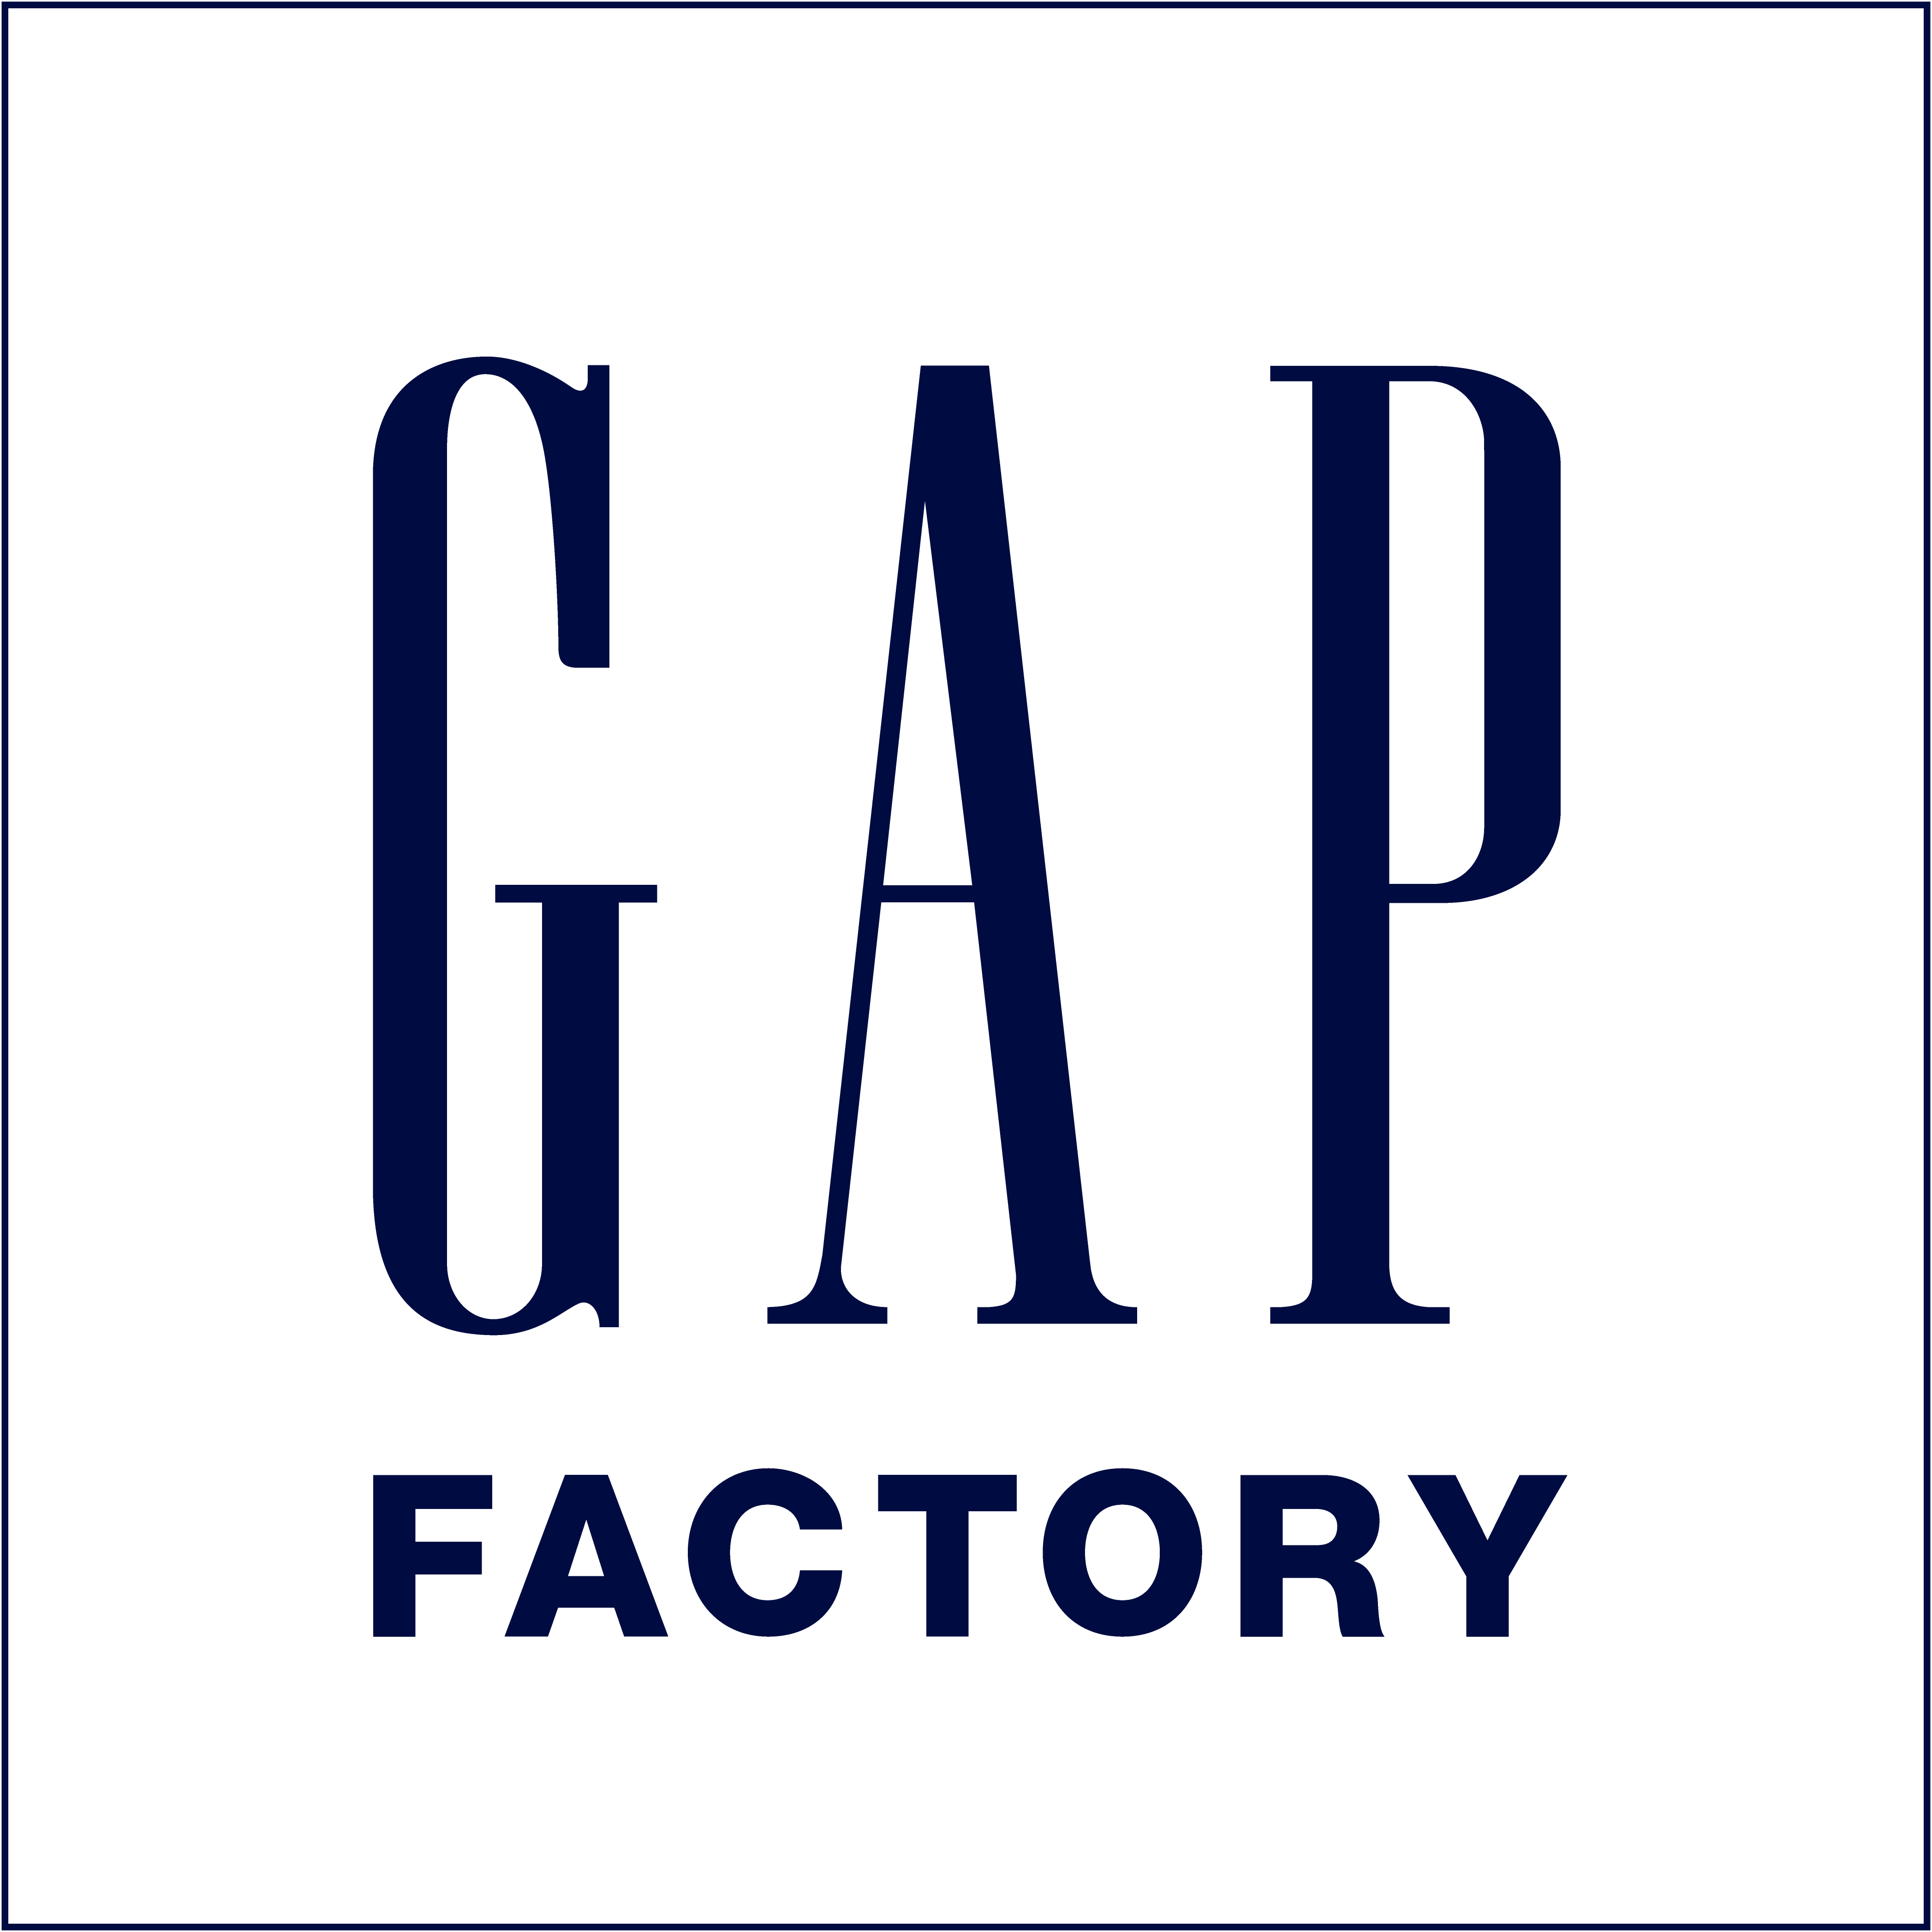 Deals On Clothes For Women, Men, Baby And Kids | Gap Factory